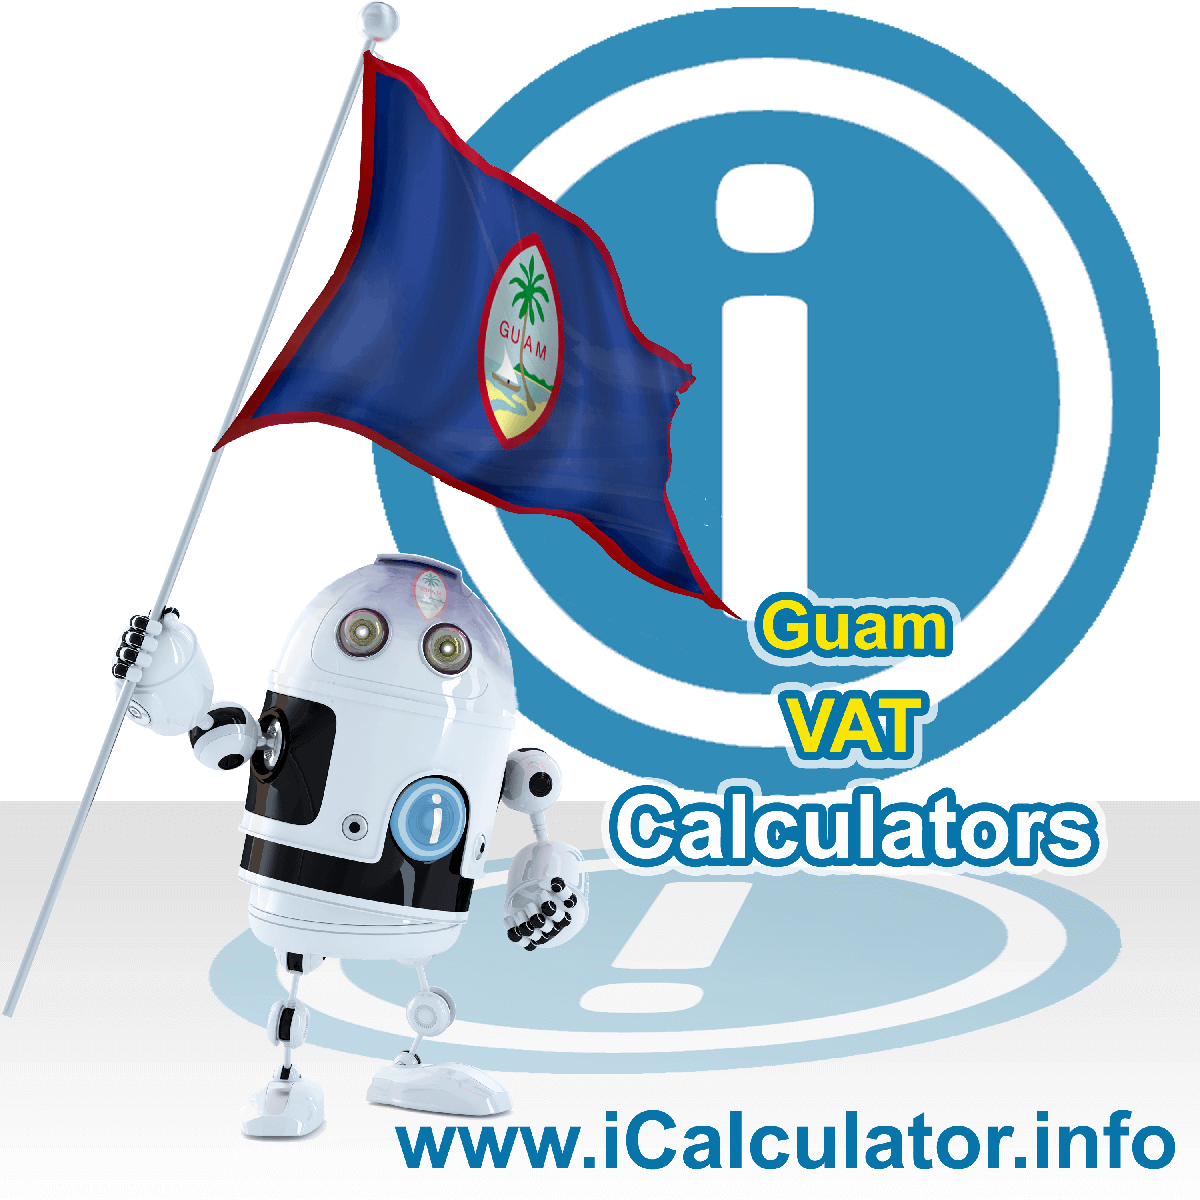 Guam VAT Calculator. This image shows the Guam flag and information relating to the VAT formula used for calculating Value Added Tax in Guam using the Guam VAT Calculator in 2023